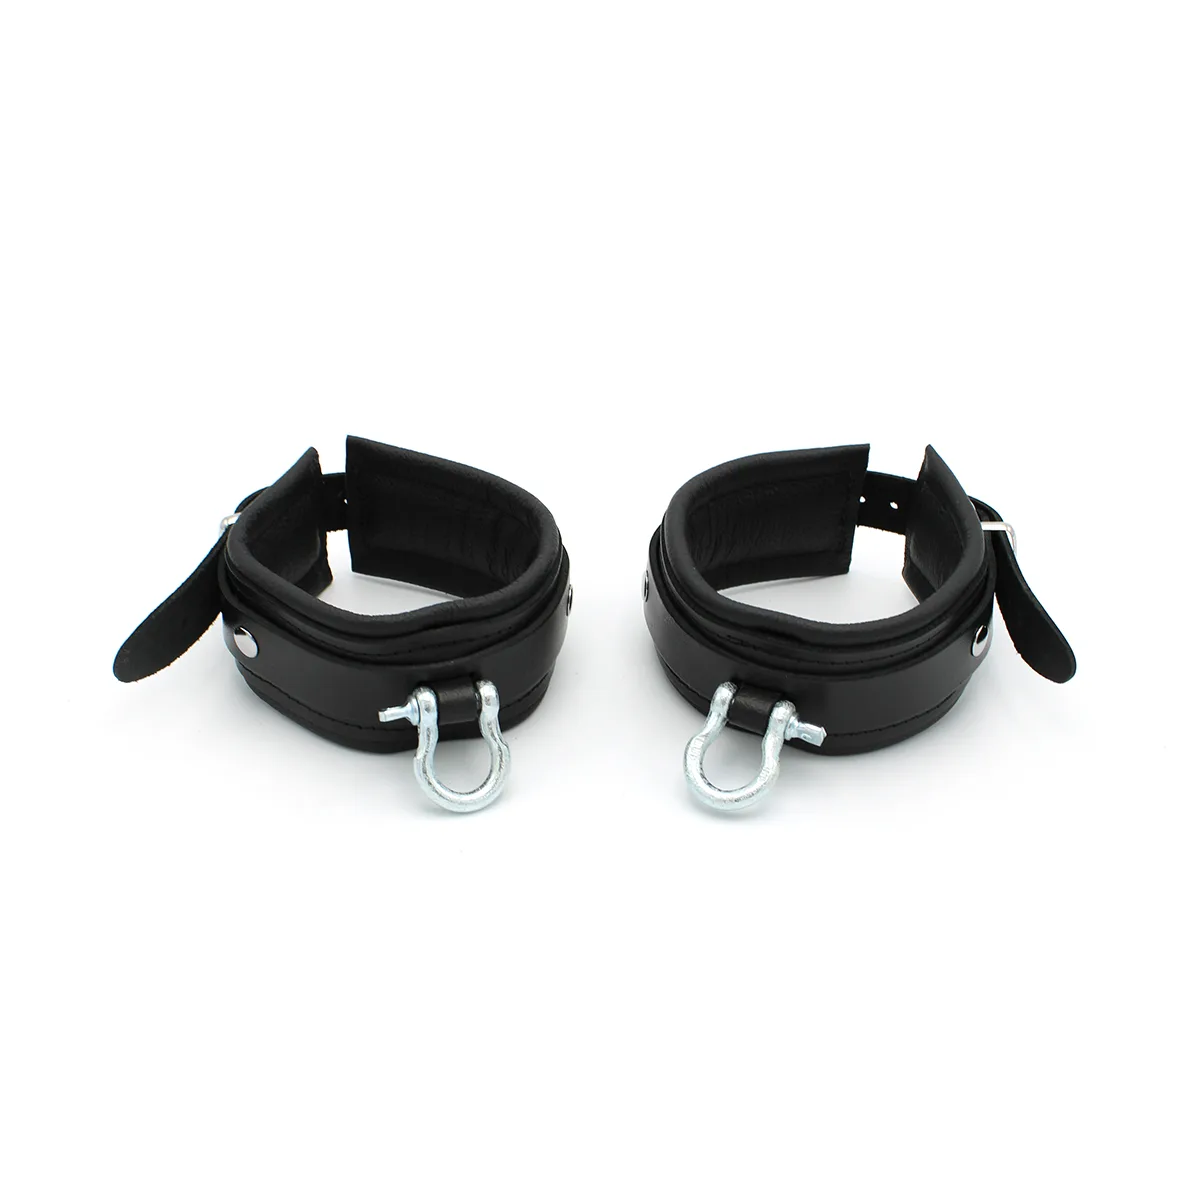 Leather-Ankle-cuffs-with-Metal-Shackle-134-KIO-0372-2